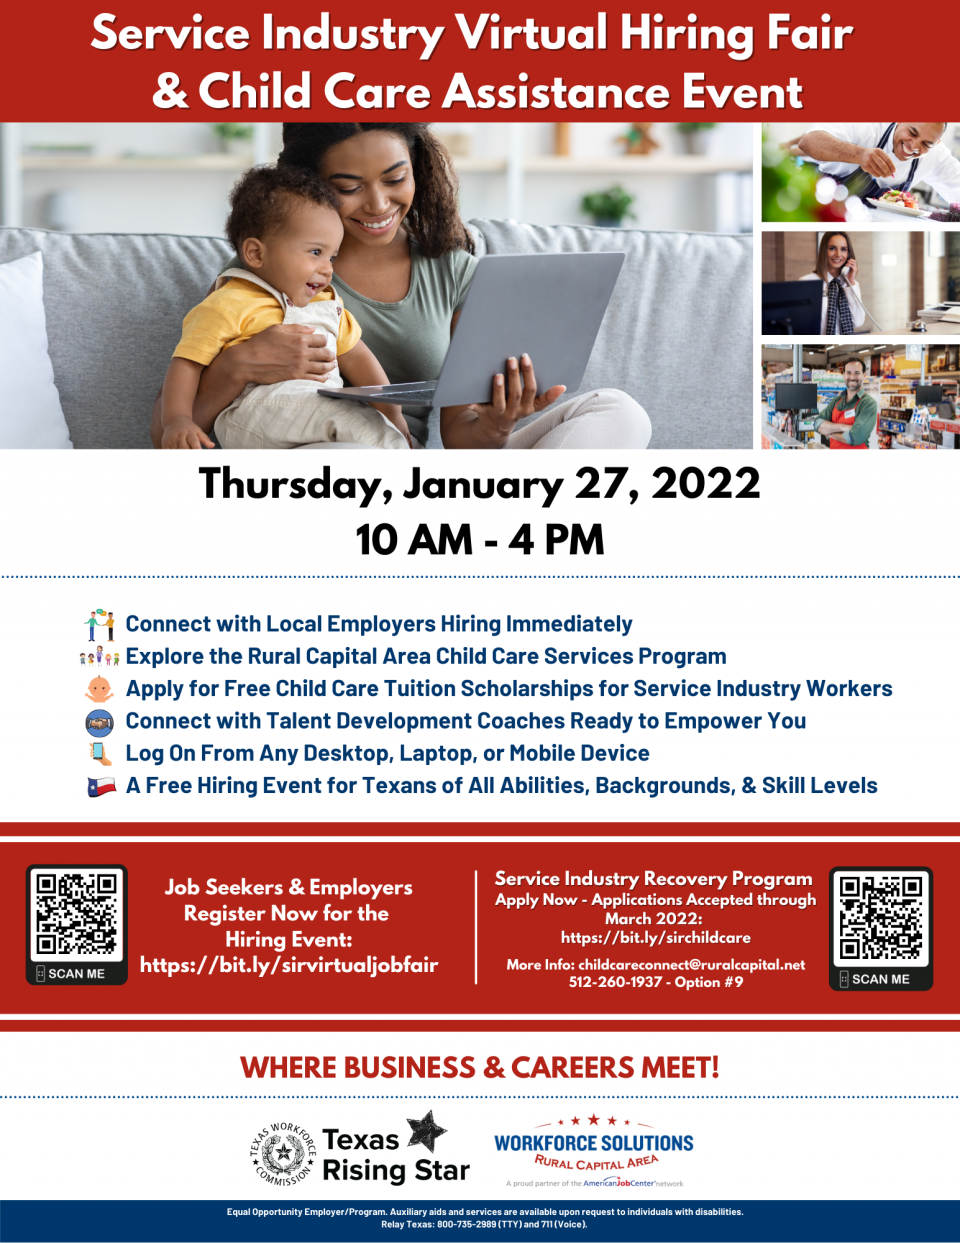 Connect With 40+ Employers at the Service Industry Virtual Hiring Fair & Child Care Assistance Event